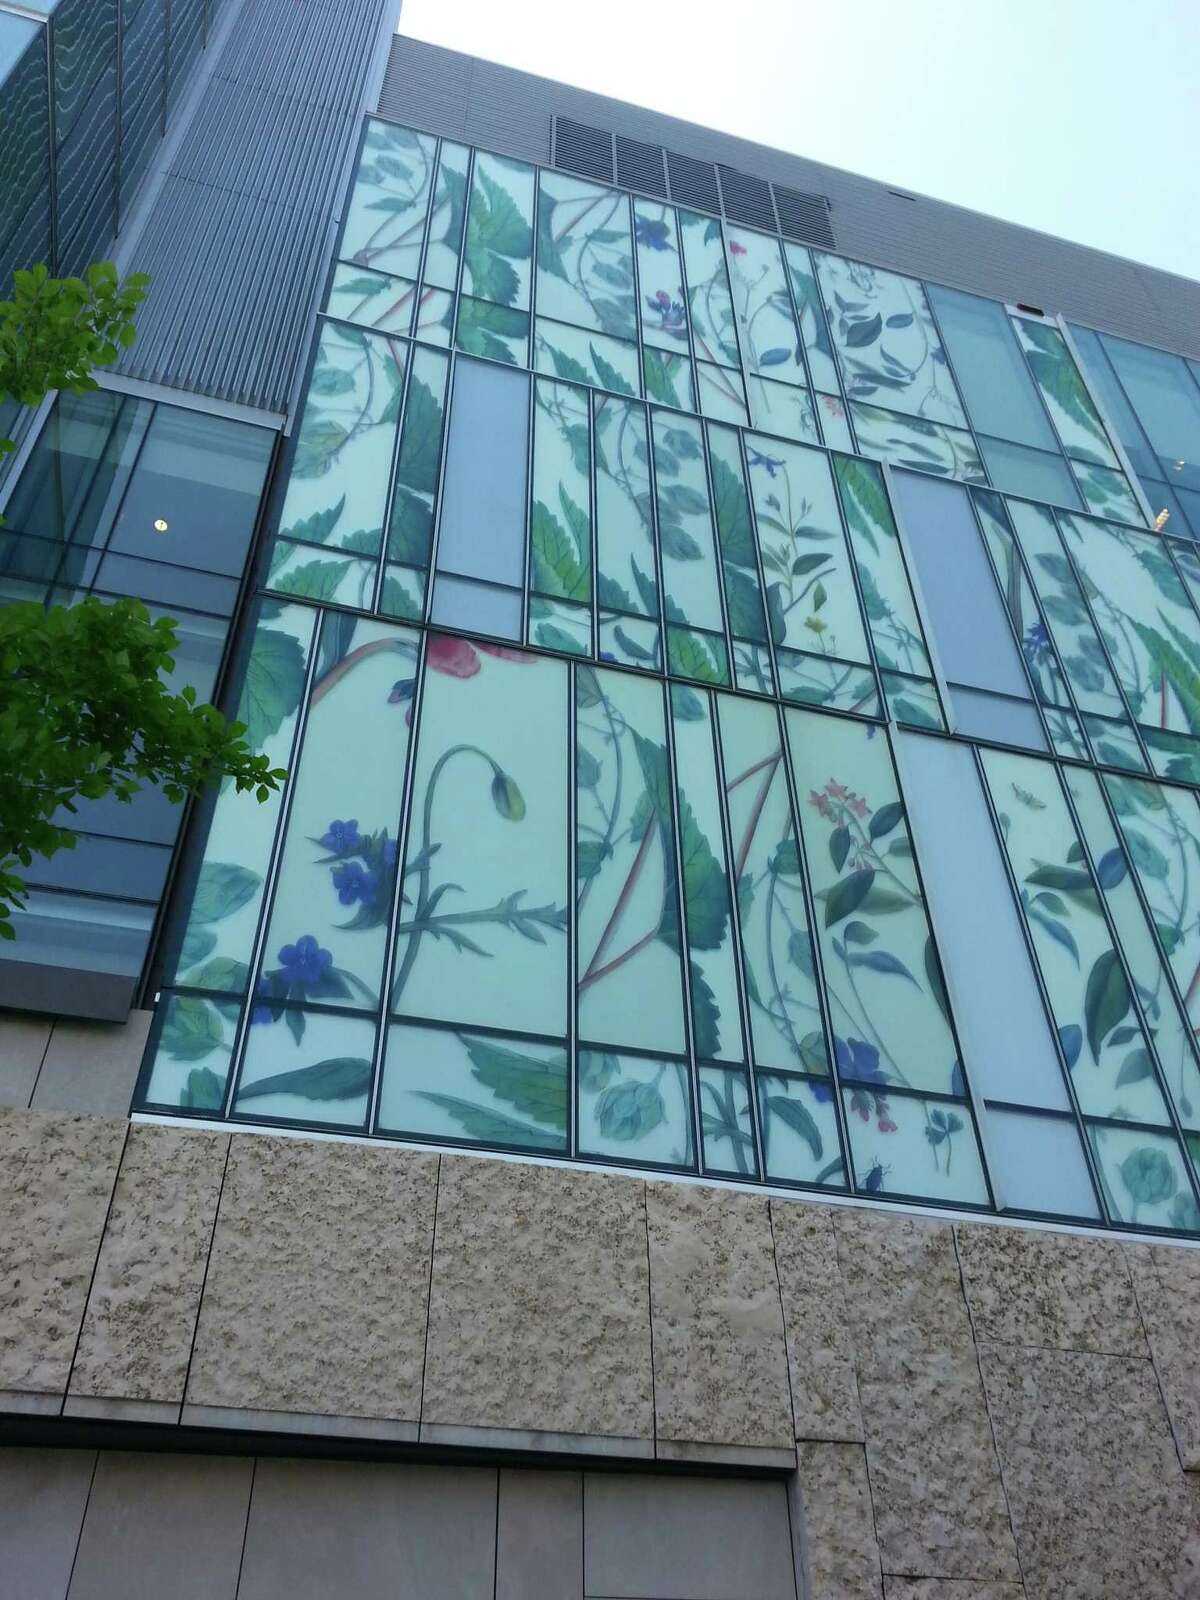 This undated publicity photo provided by American Bird Conservancy shows a bird-friendly design at the School of Pharmacy at the University of Waterloo that uses a variety of different materials in addition to glass, including panels depicting plants that are the sources of different drugs, in Ontario, Canada. (AP Photo/American Bird Conservancy, Christine Sheppard)